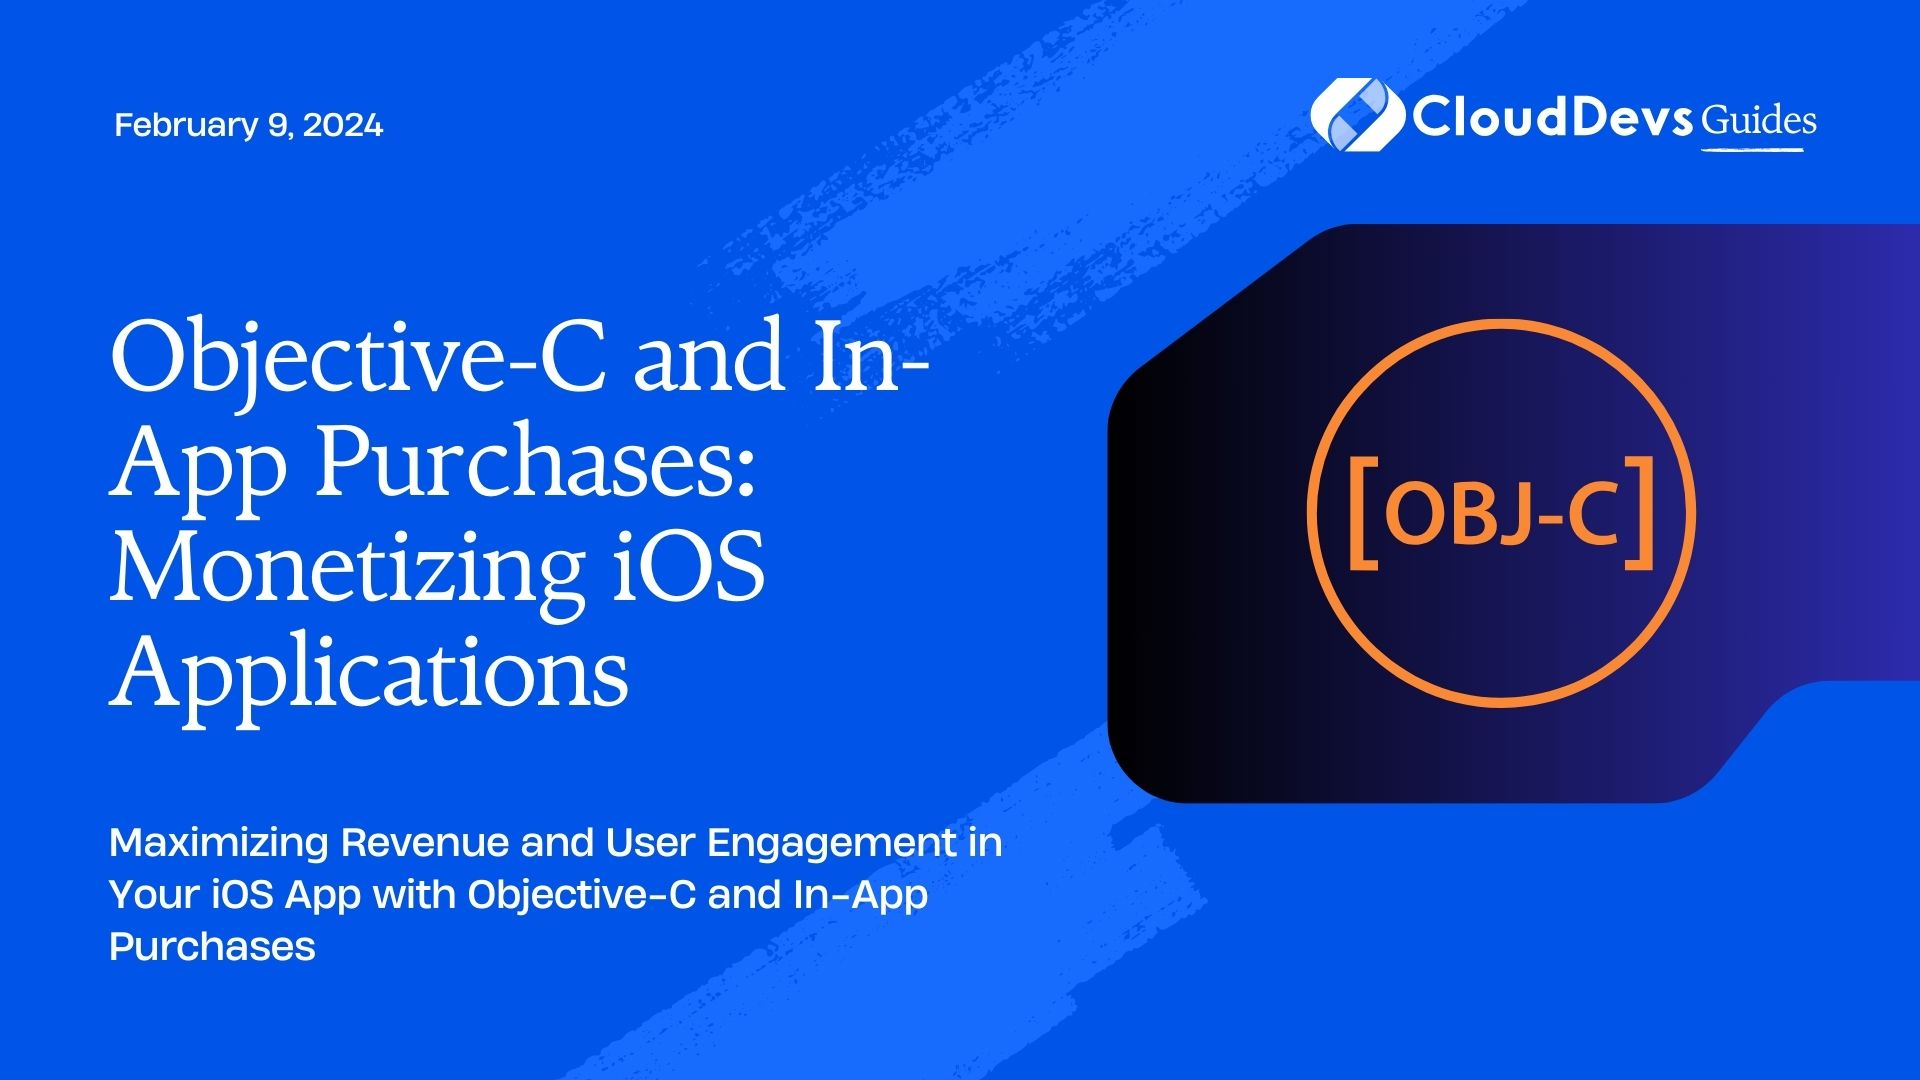 Objective-C and In-App Purchases: Monetizing iOS Applications